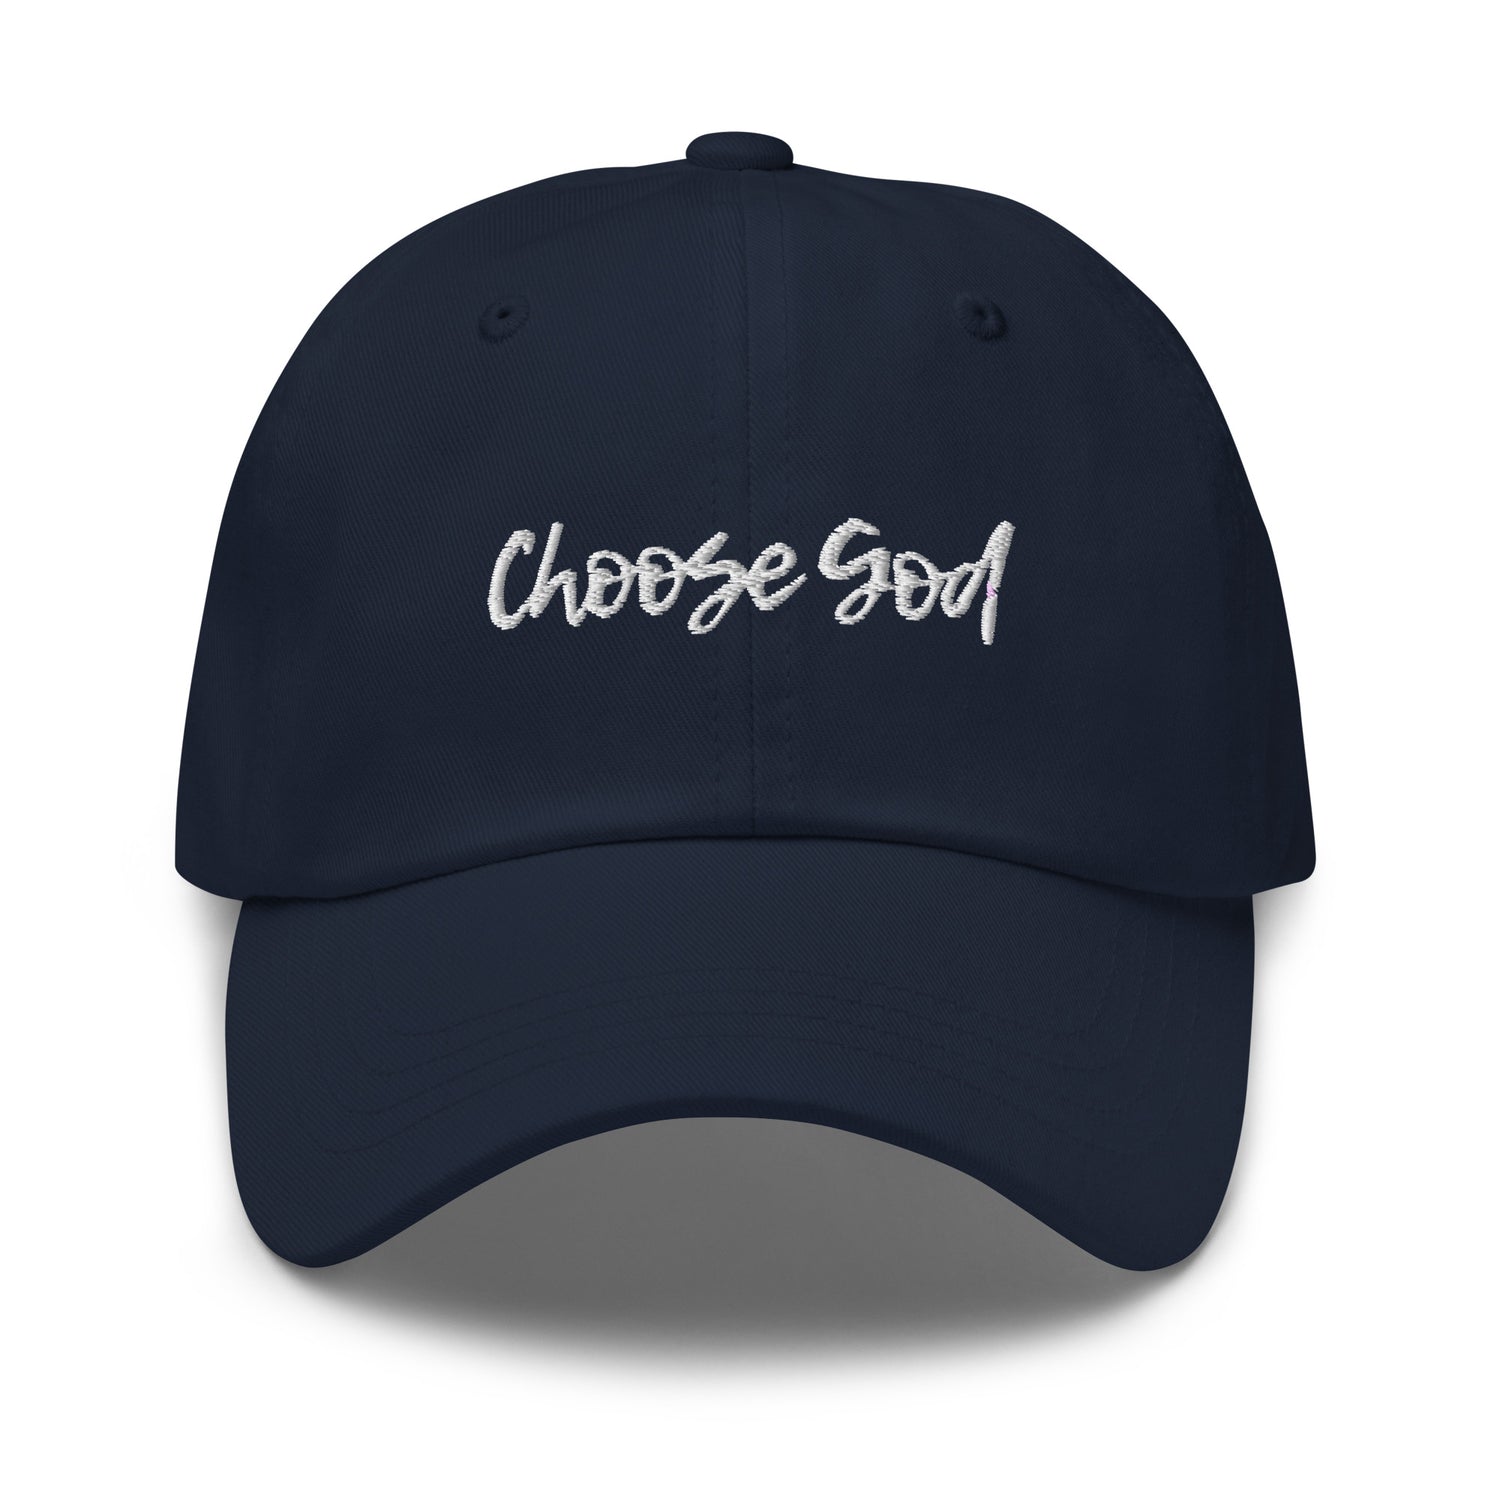 Christian hat navy color